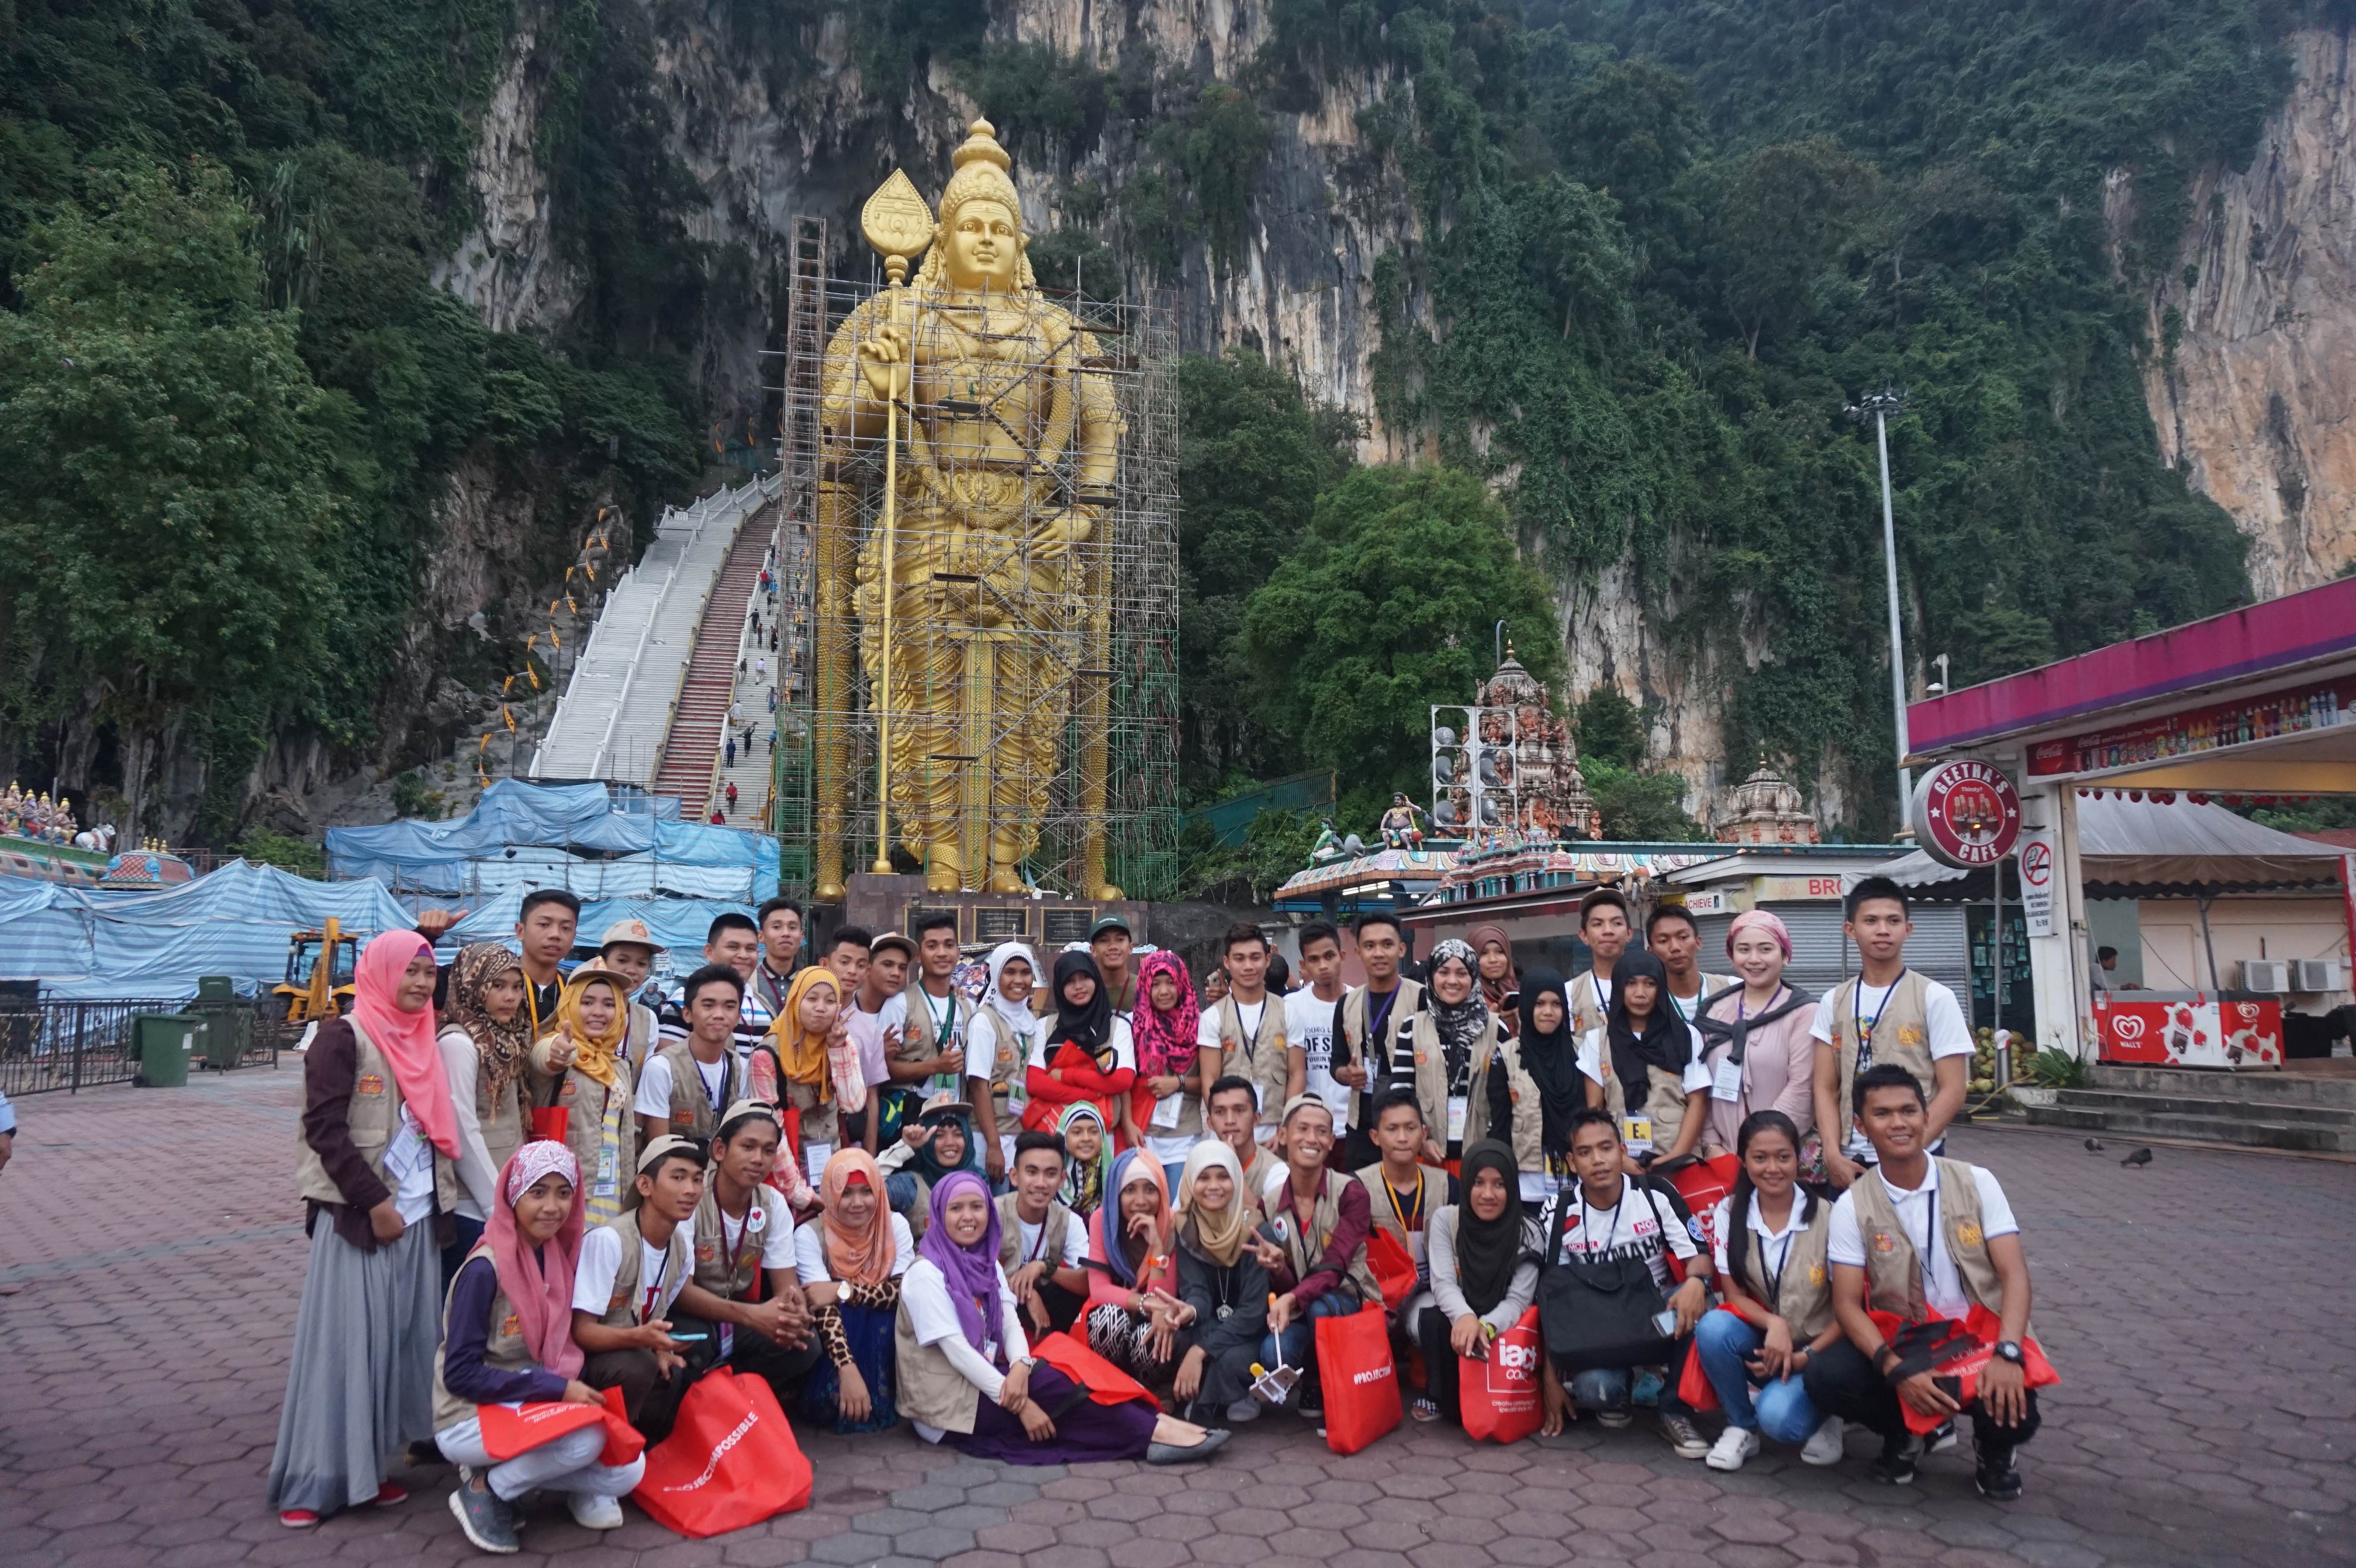 LEARNING FROM EACH OTHER. Members of the delegation pose in front of the Batu Caves after a tour conducted by students of Brickfields Asia College. Photo by Carol Ramoran
